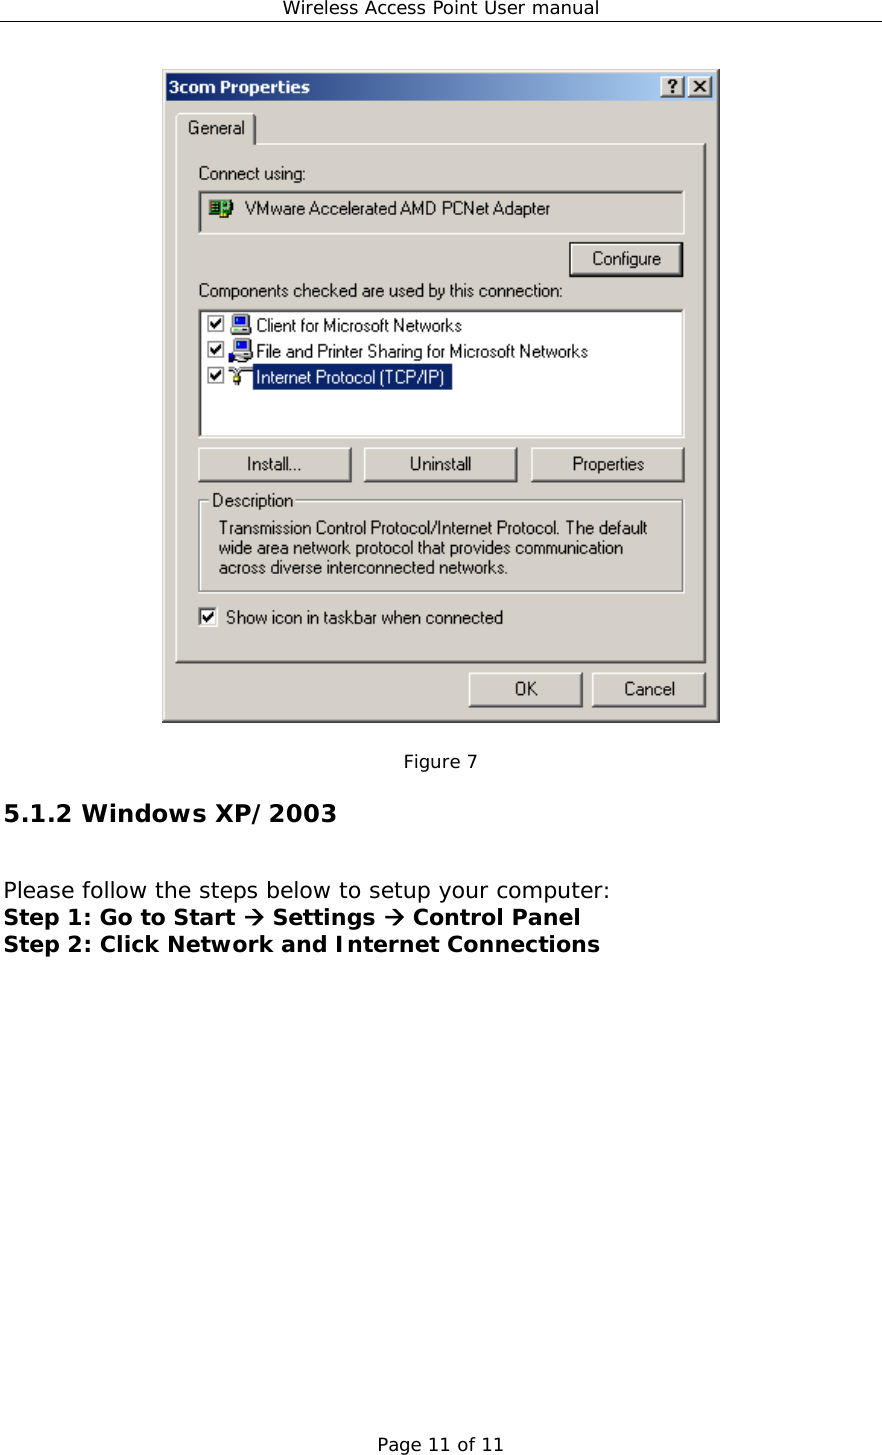 Wireless Access Point User manual Page 11 of 11   Figure 7 5.1.2 Windows XP/2003 Please follow the steps below to setup your computer: Step 1: Go to Start  Settings  Control Panel Step 2: Click Network and Internet Connections  